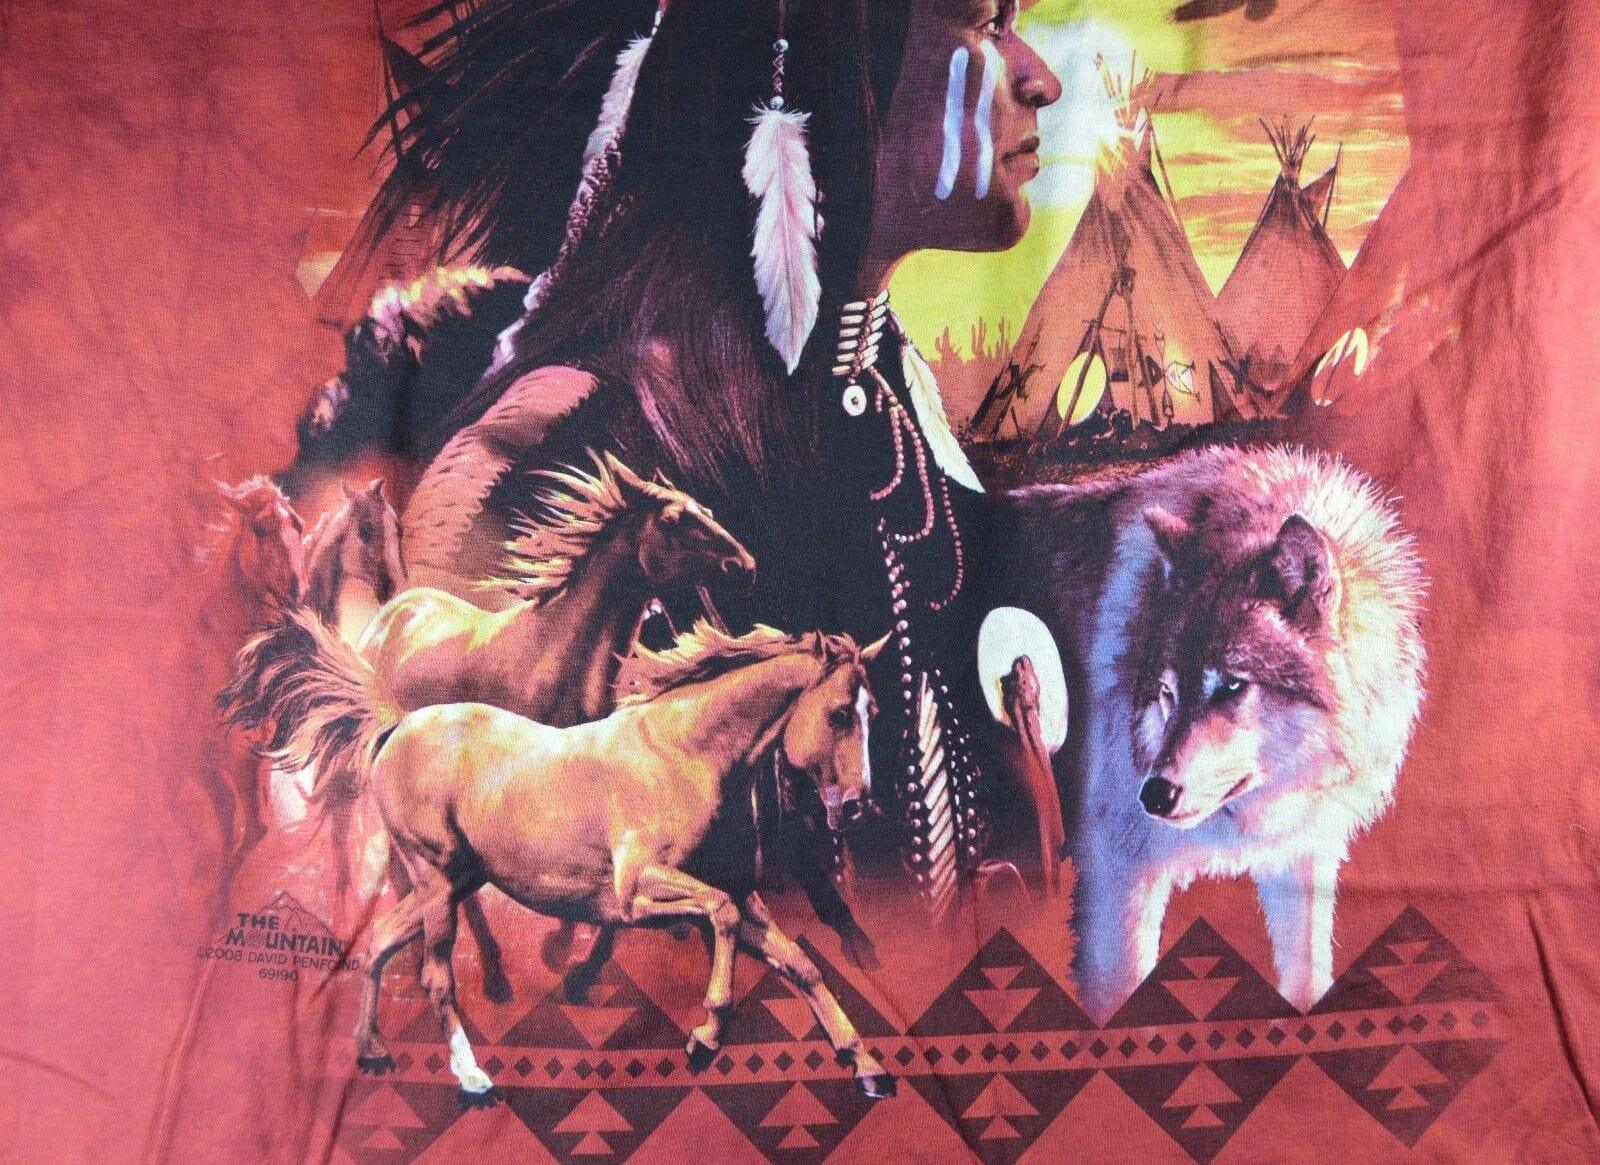 NEW THE MOUNTAIN XL SHORT SLEEVED T-SHIRT DEPICTING A NATIVE AMERICAN SCENE - TMD167207